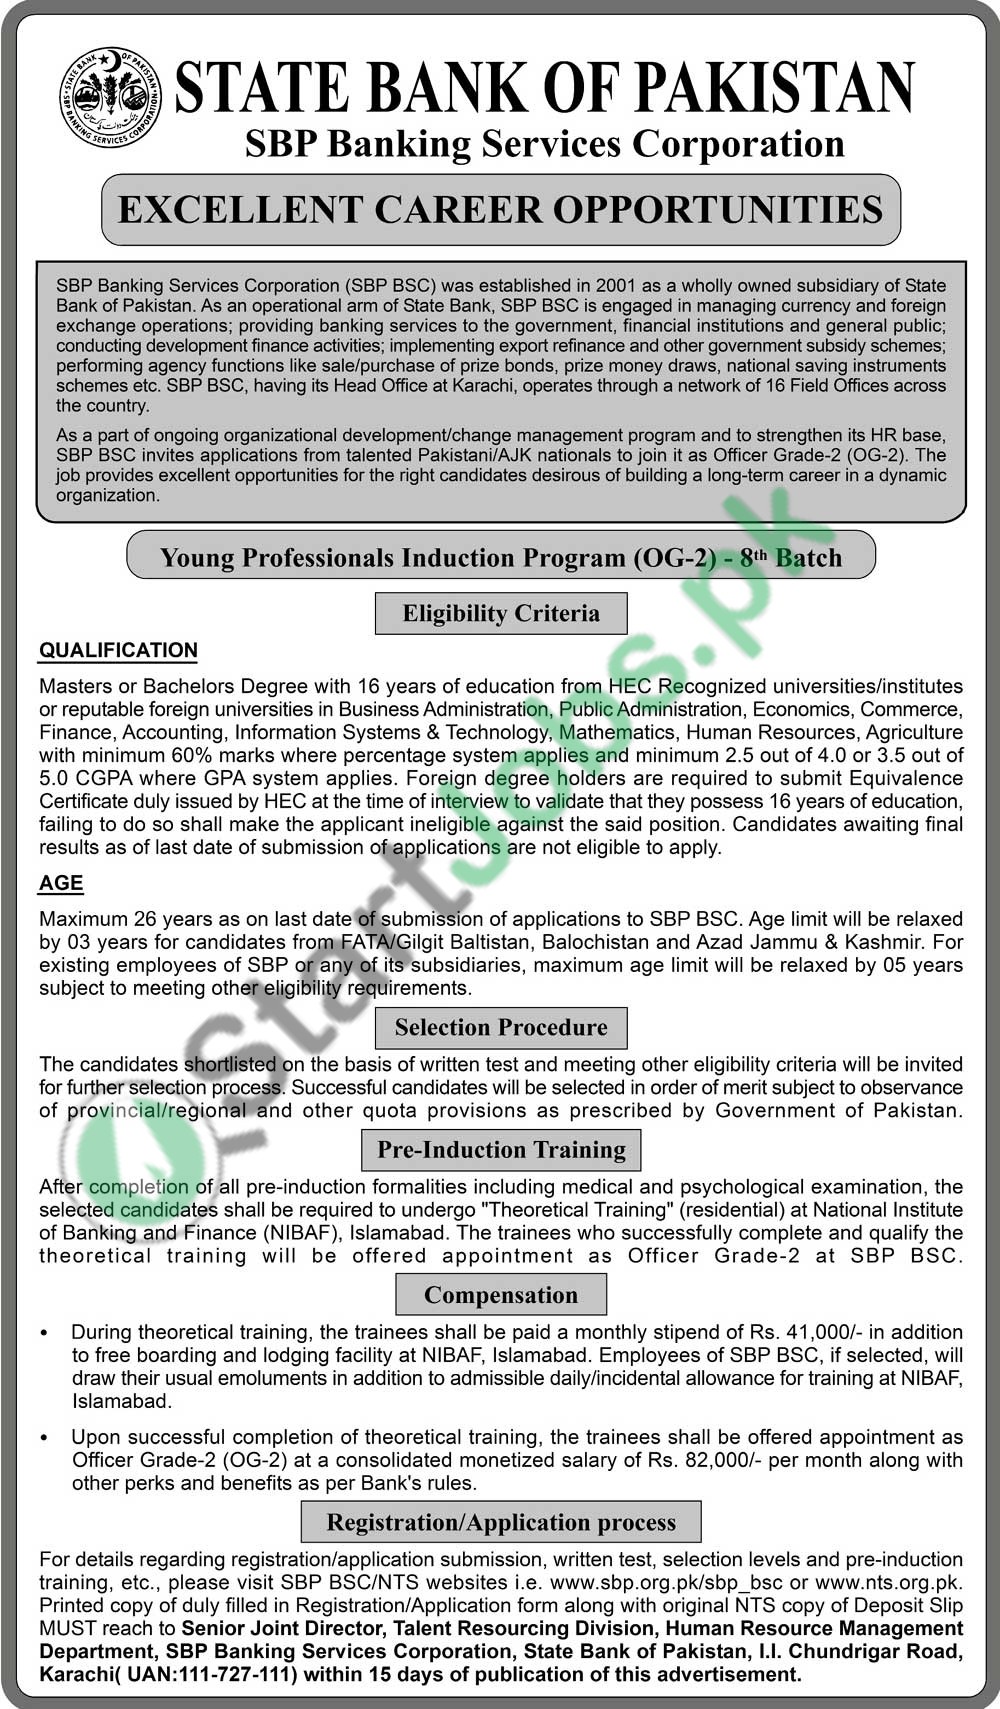 SBP Young Professionals Induction Program YPIP 8th Batch 2019